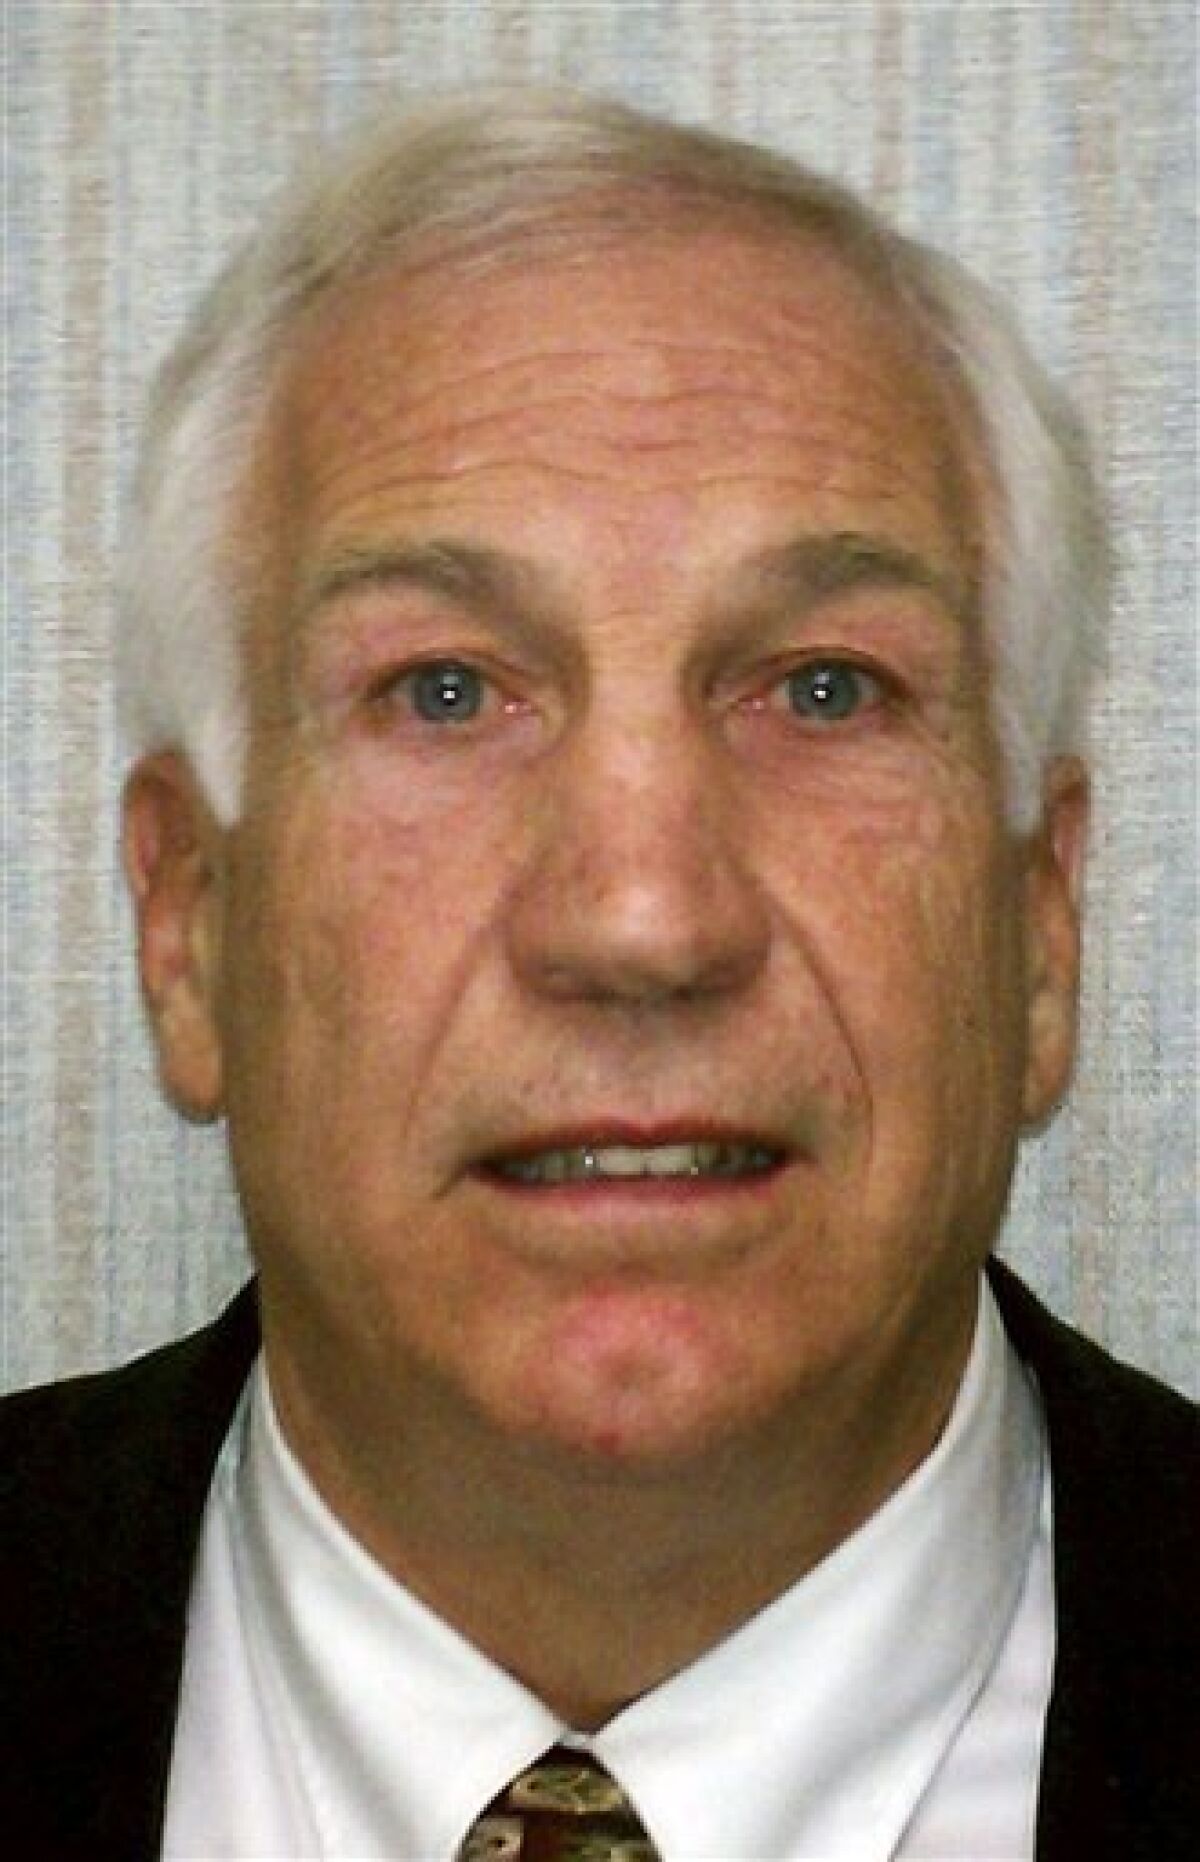 FILE - This Nov. 5, 2011 file photo provided by the Pennsylvania Office of Attorney General shows former Penn State football defensive coordinator Gerald "Jerry" Sandusky, who sexually abused a boy more than 100 times, then threatened his family to keep him quiet about the encounters, according to a lawsuit filed Wednesday, Nov. 30, 2011 that details new accusations not included in criminal charges against him. (AP Photo/Pennsylvania Office of Attorney General, File)